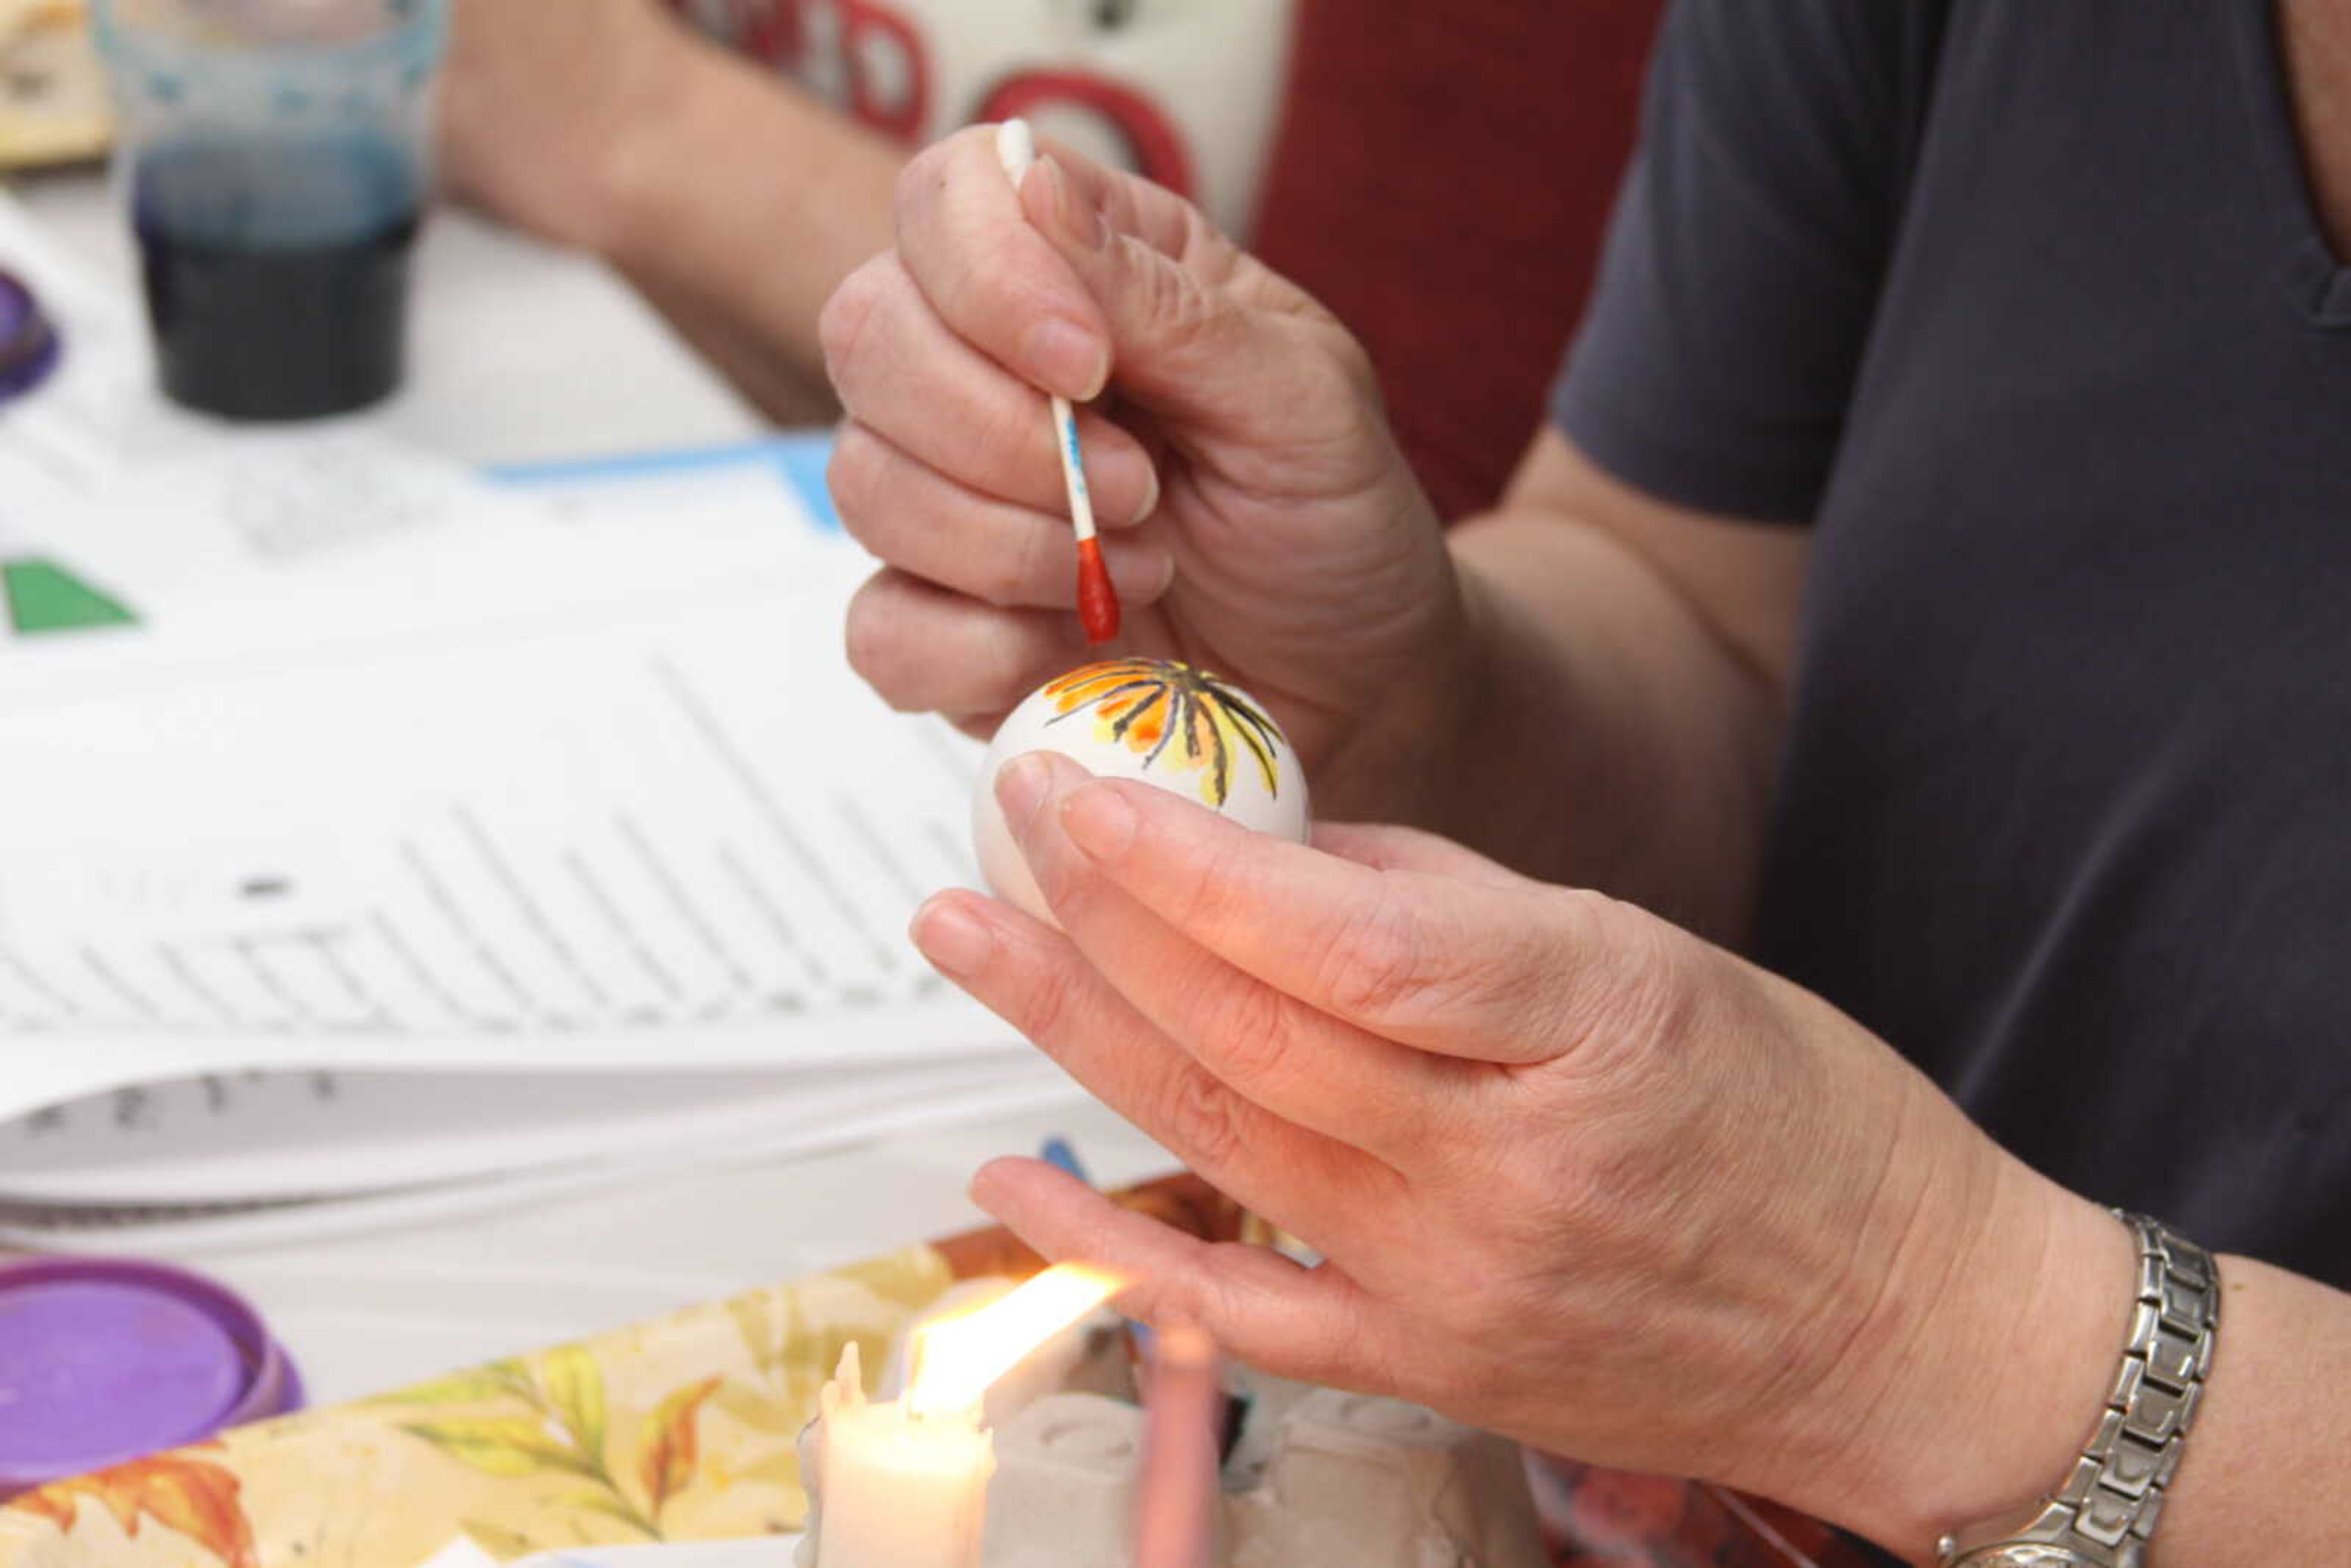 A moment from the Ukrainian egg decorating class held on April 9 and 10 at the Crisp Museum at the River Campus.